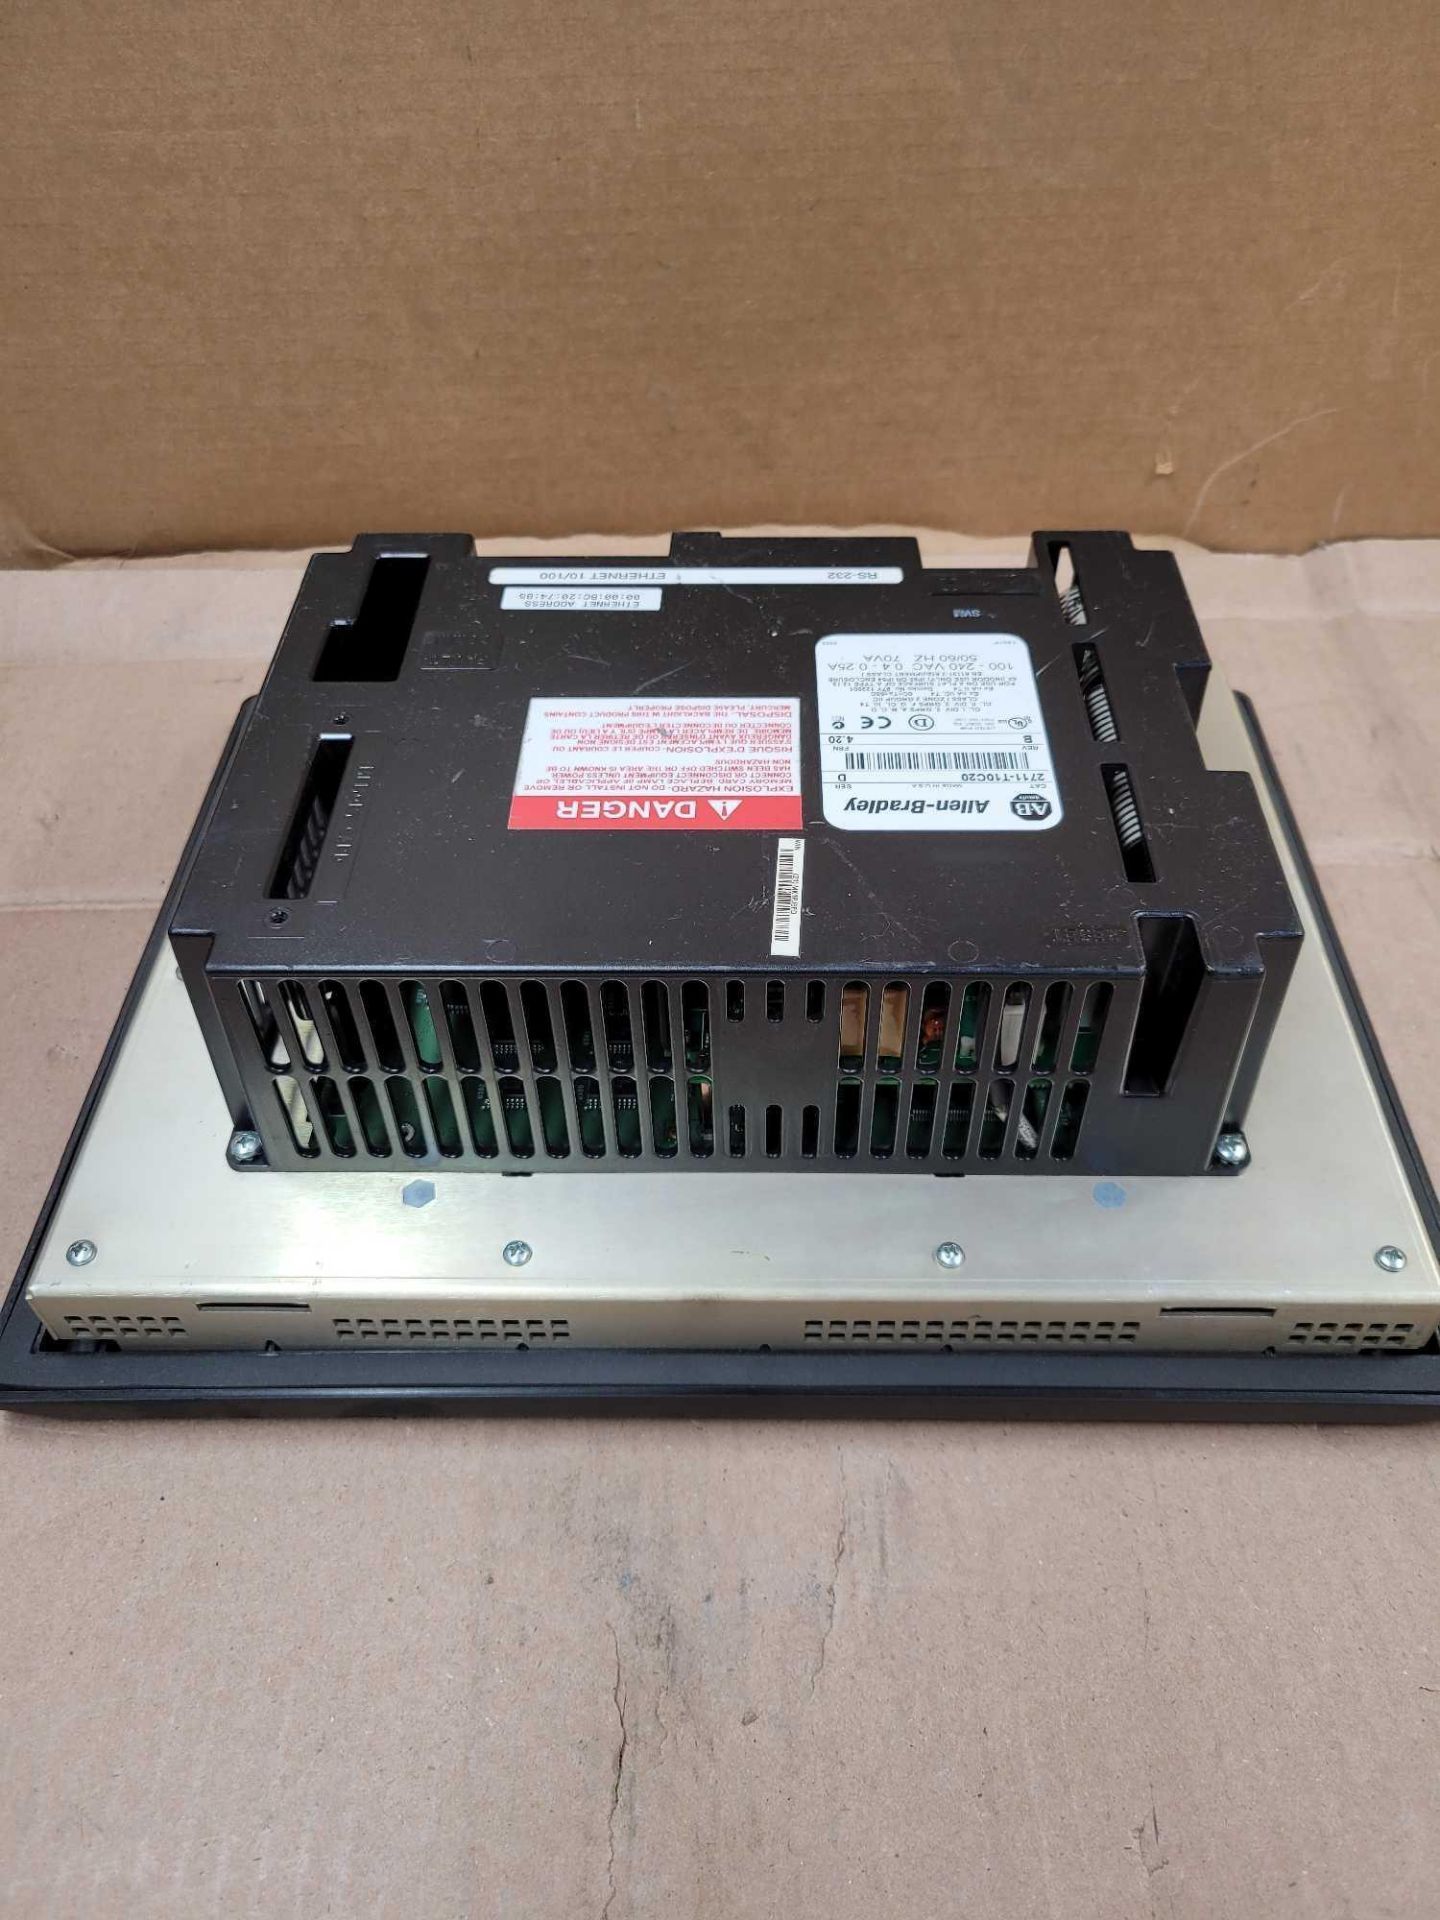 ALLEN BRADLEY 2711-T10C20 / Series D PanelView1000 Operator Interface  /  Lot Weight: 6.4 lbs - Image 6 of 7